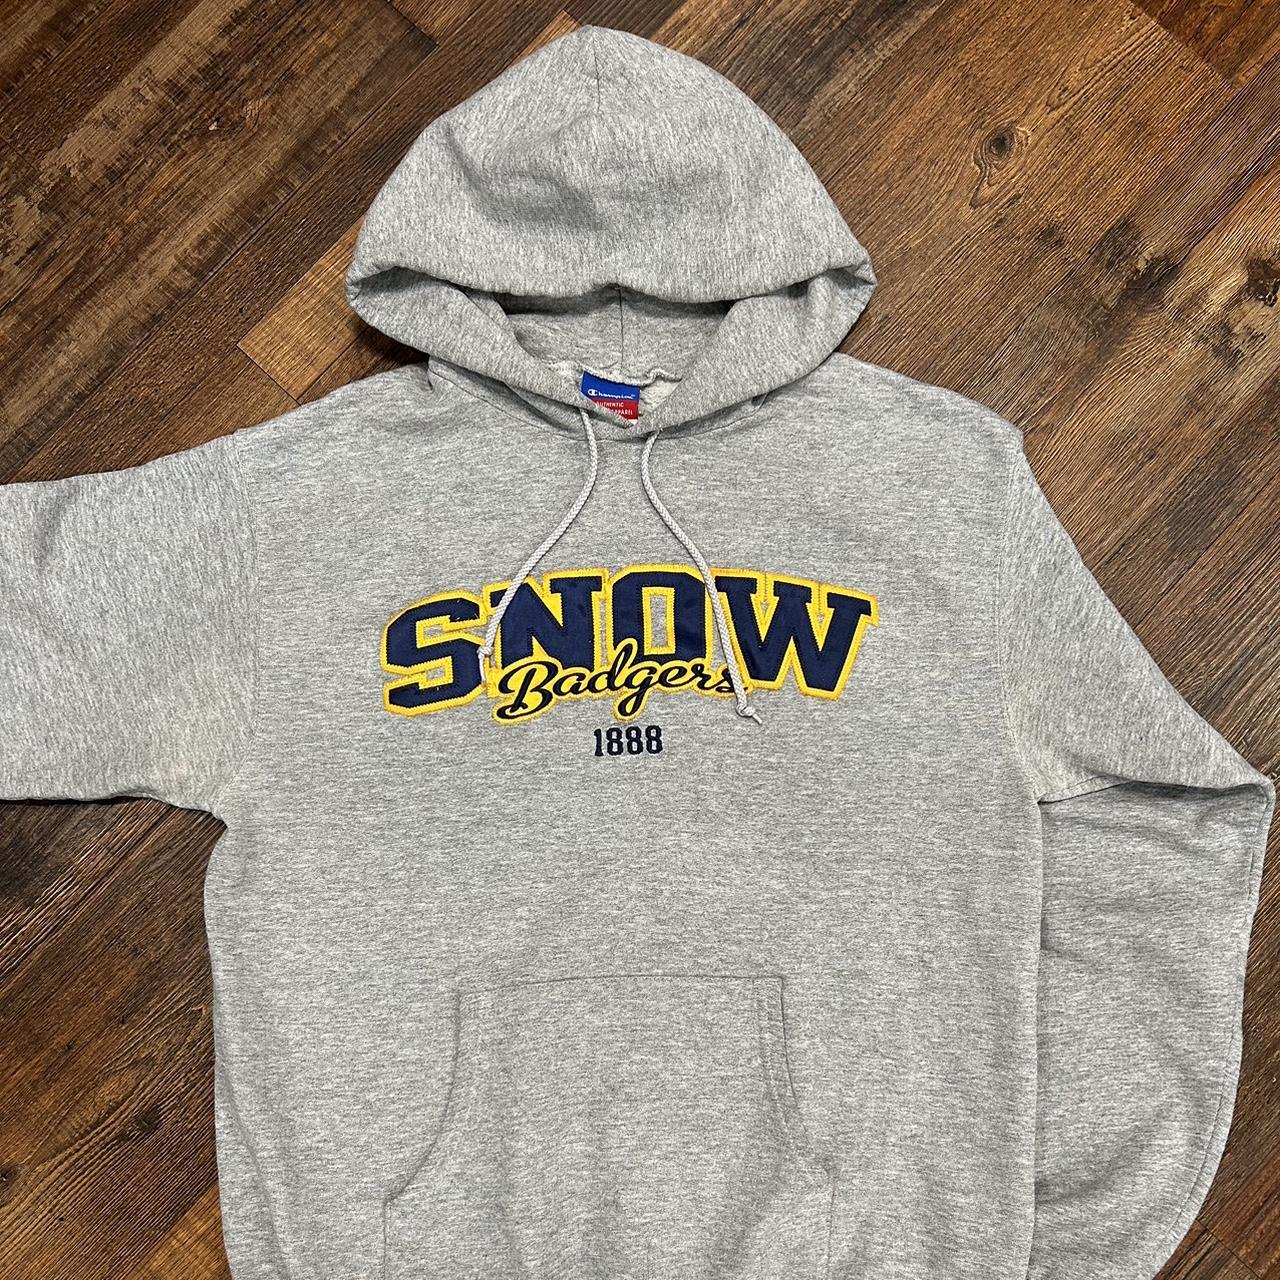 Snow badgers champion hoodie. If you live in the... - Depop